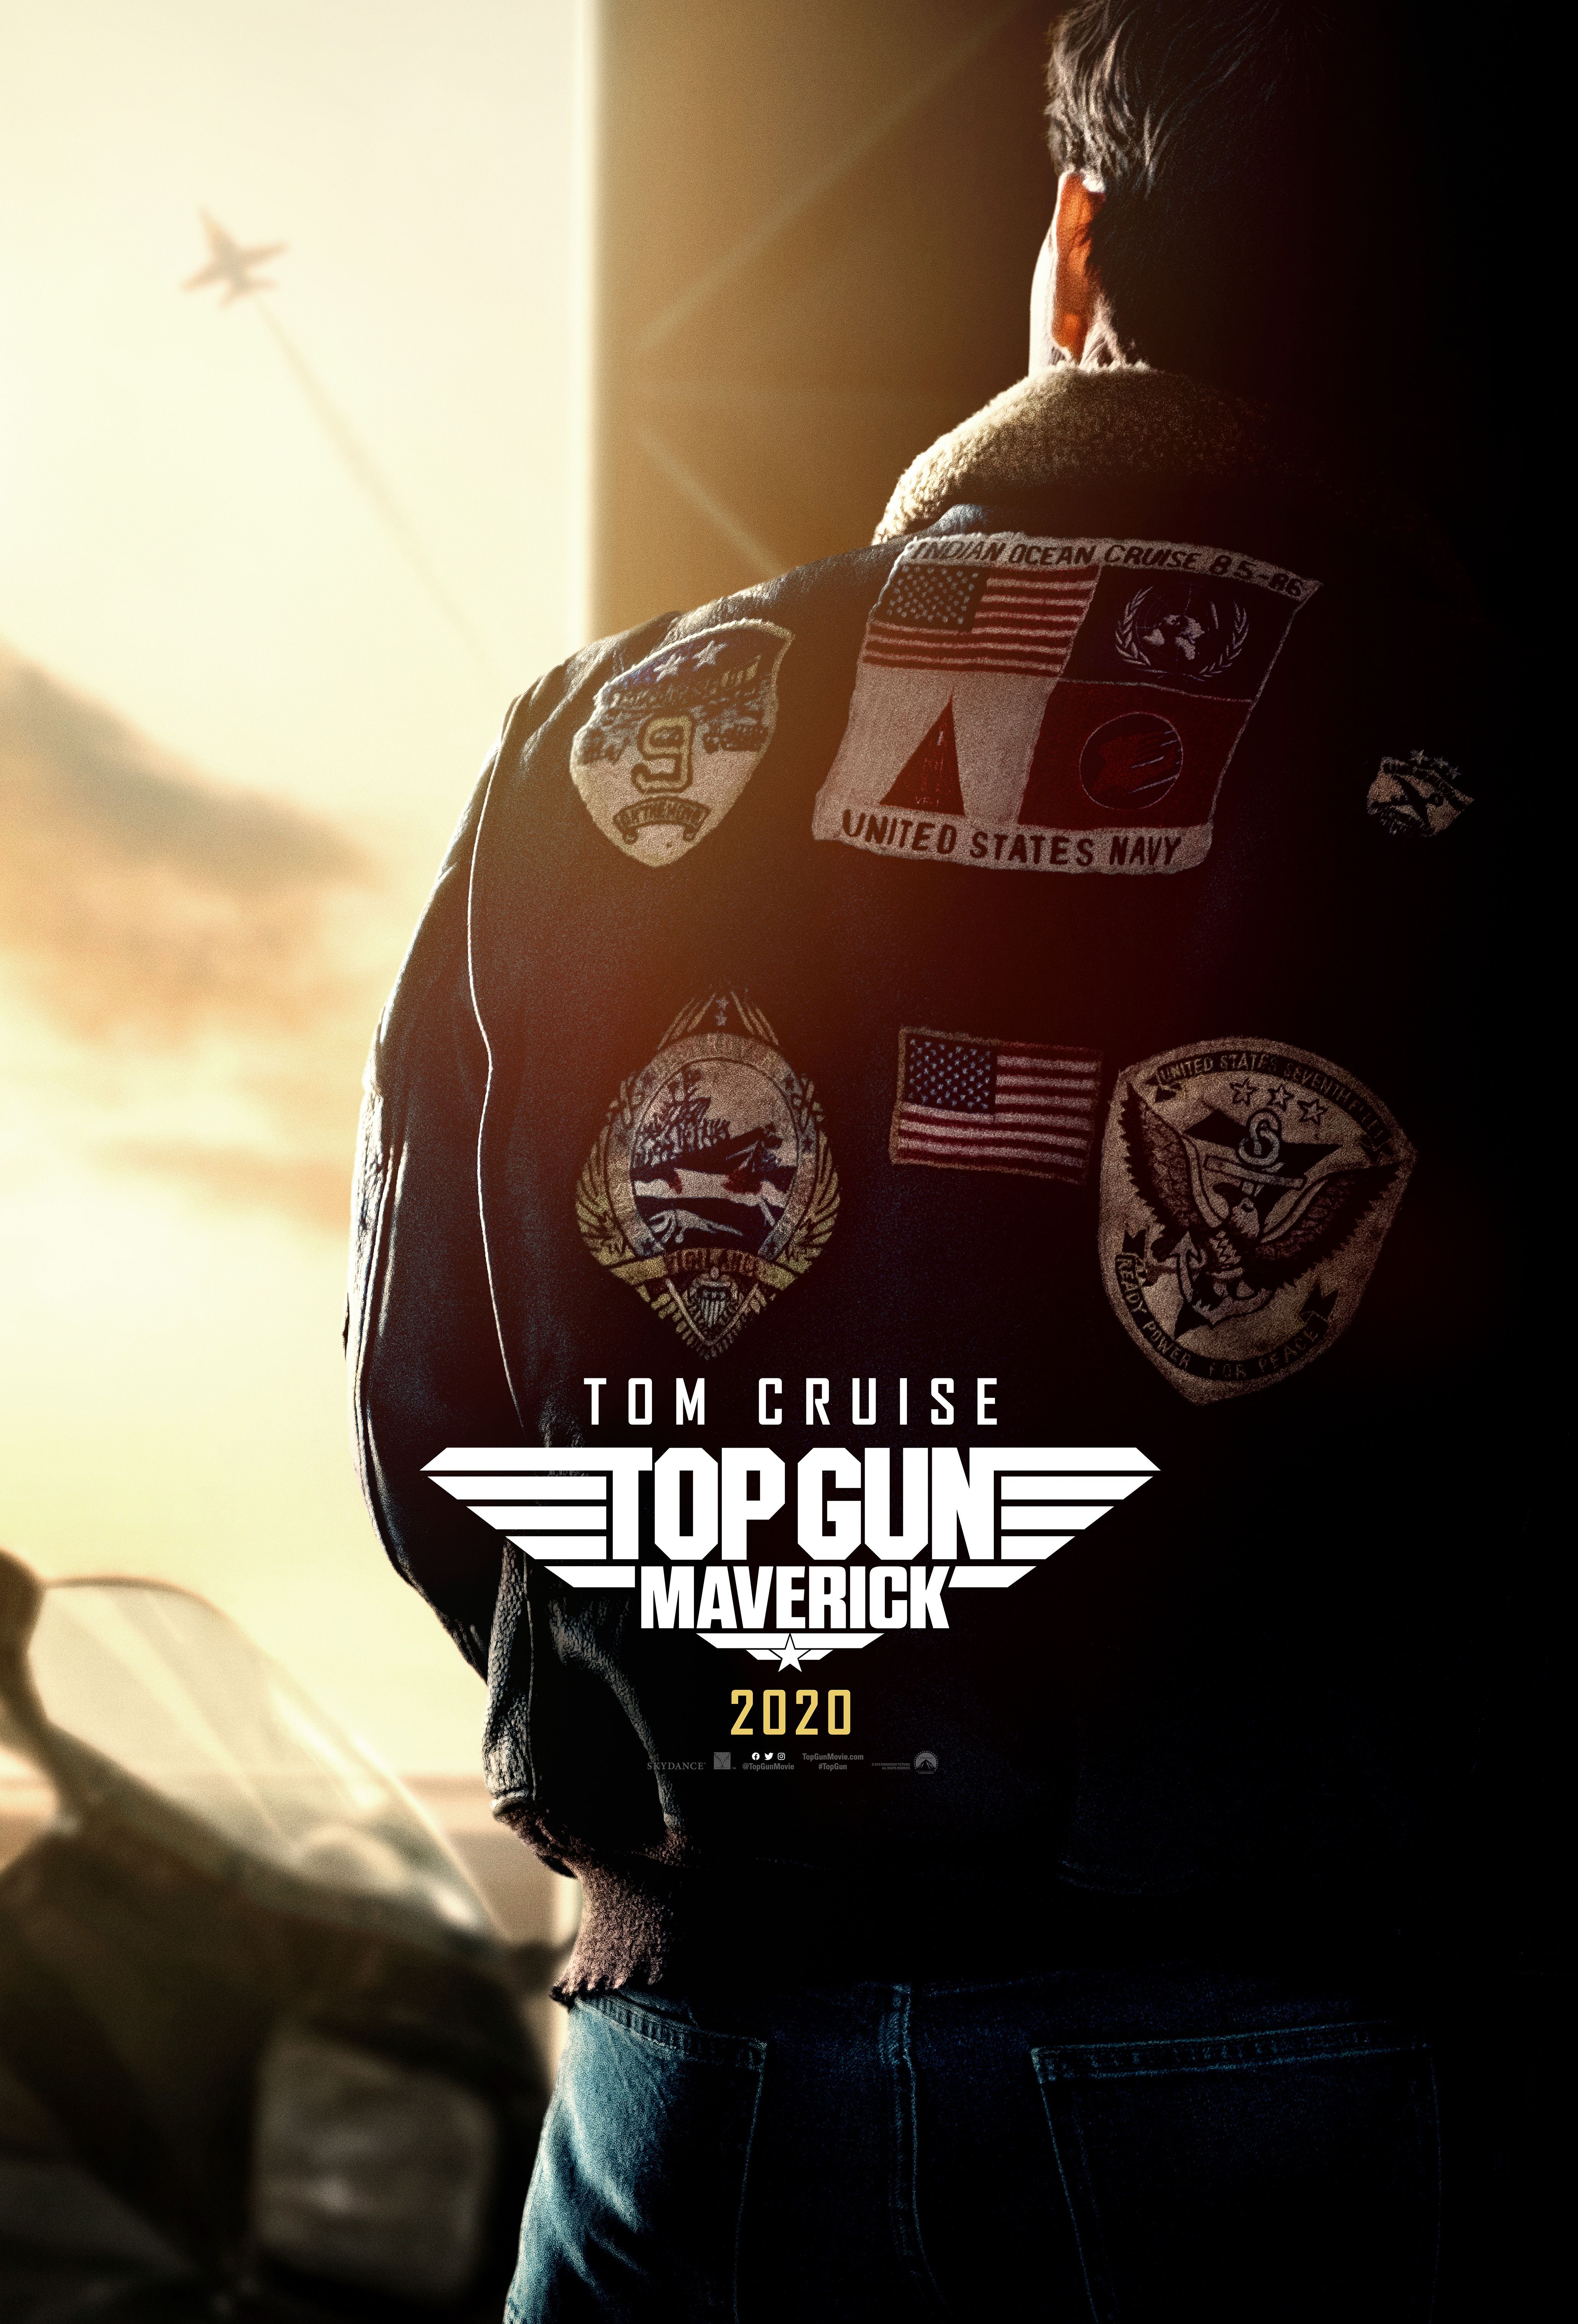 Check out the official poster for #TopGun: Maverick starring